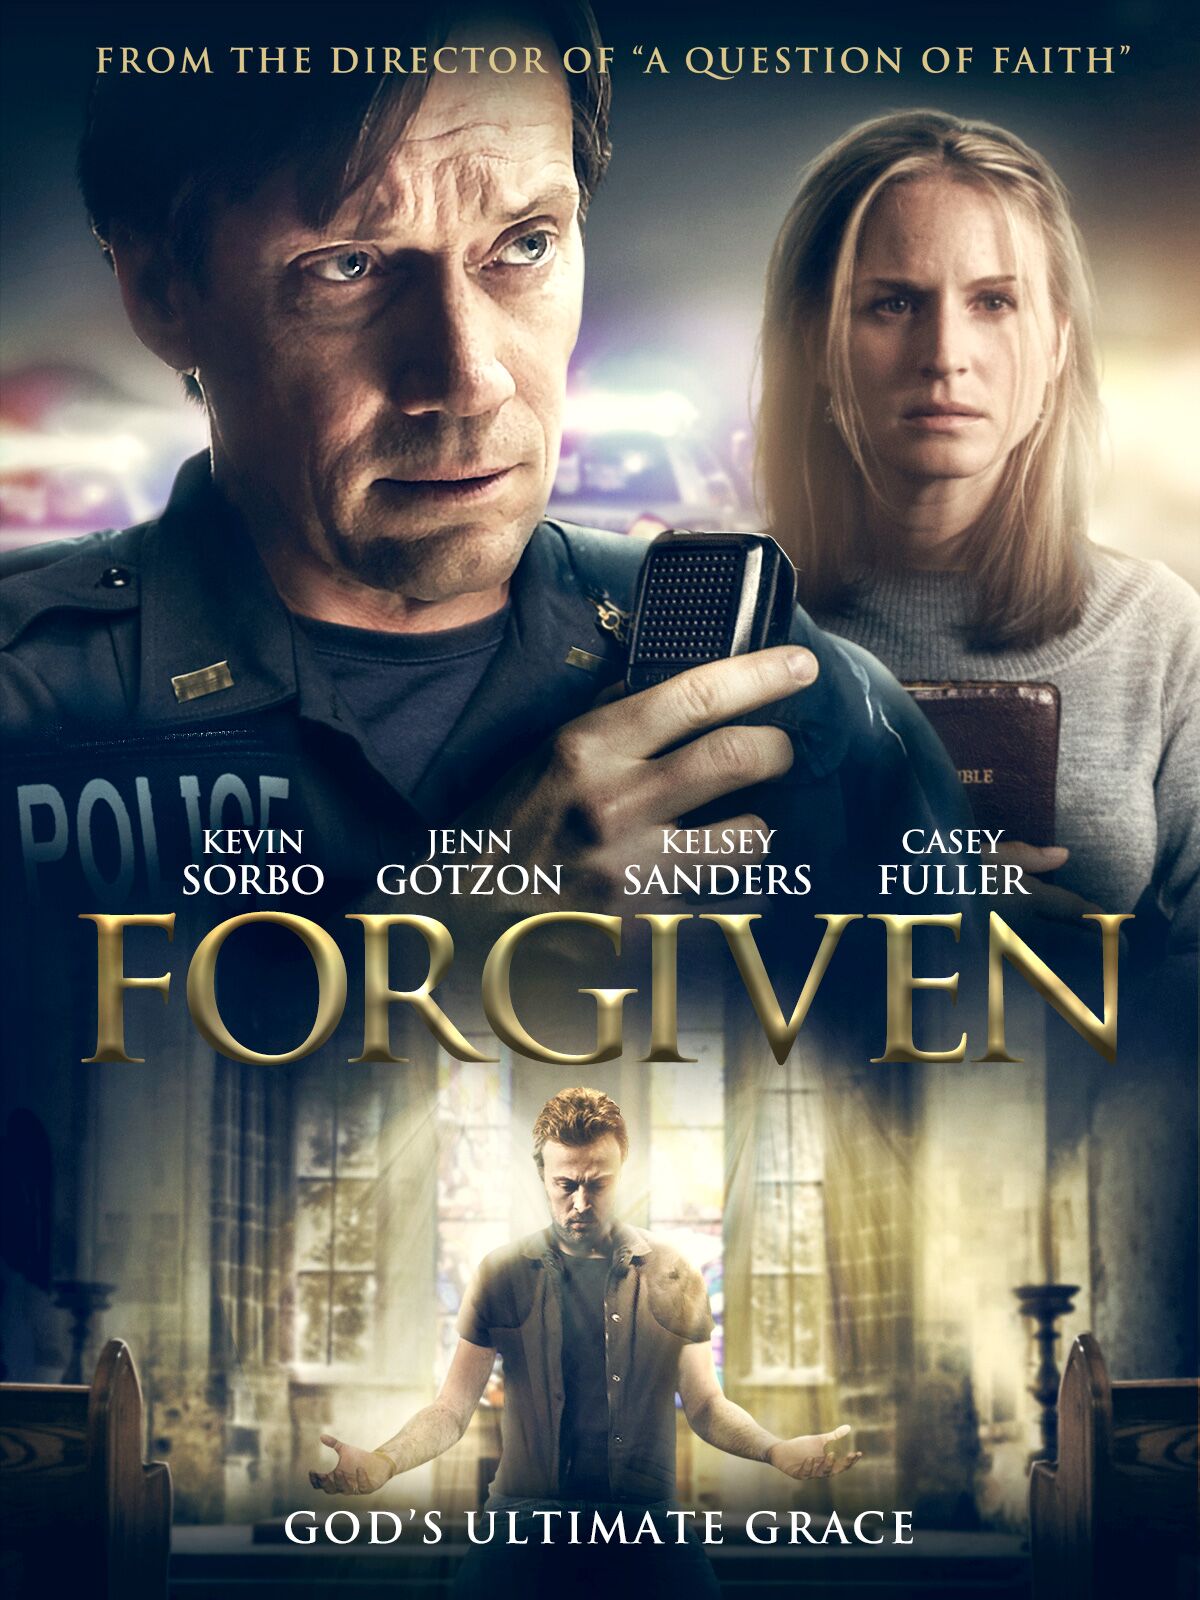 The Forgiven 2016 2142 Poster.jpg